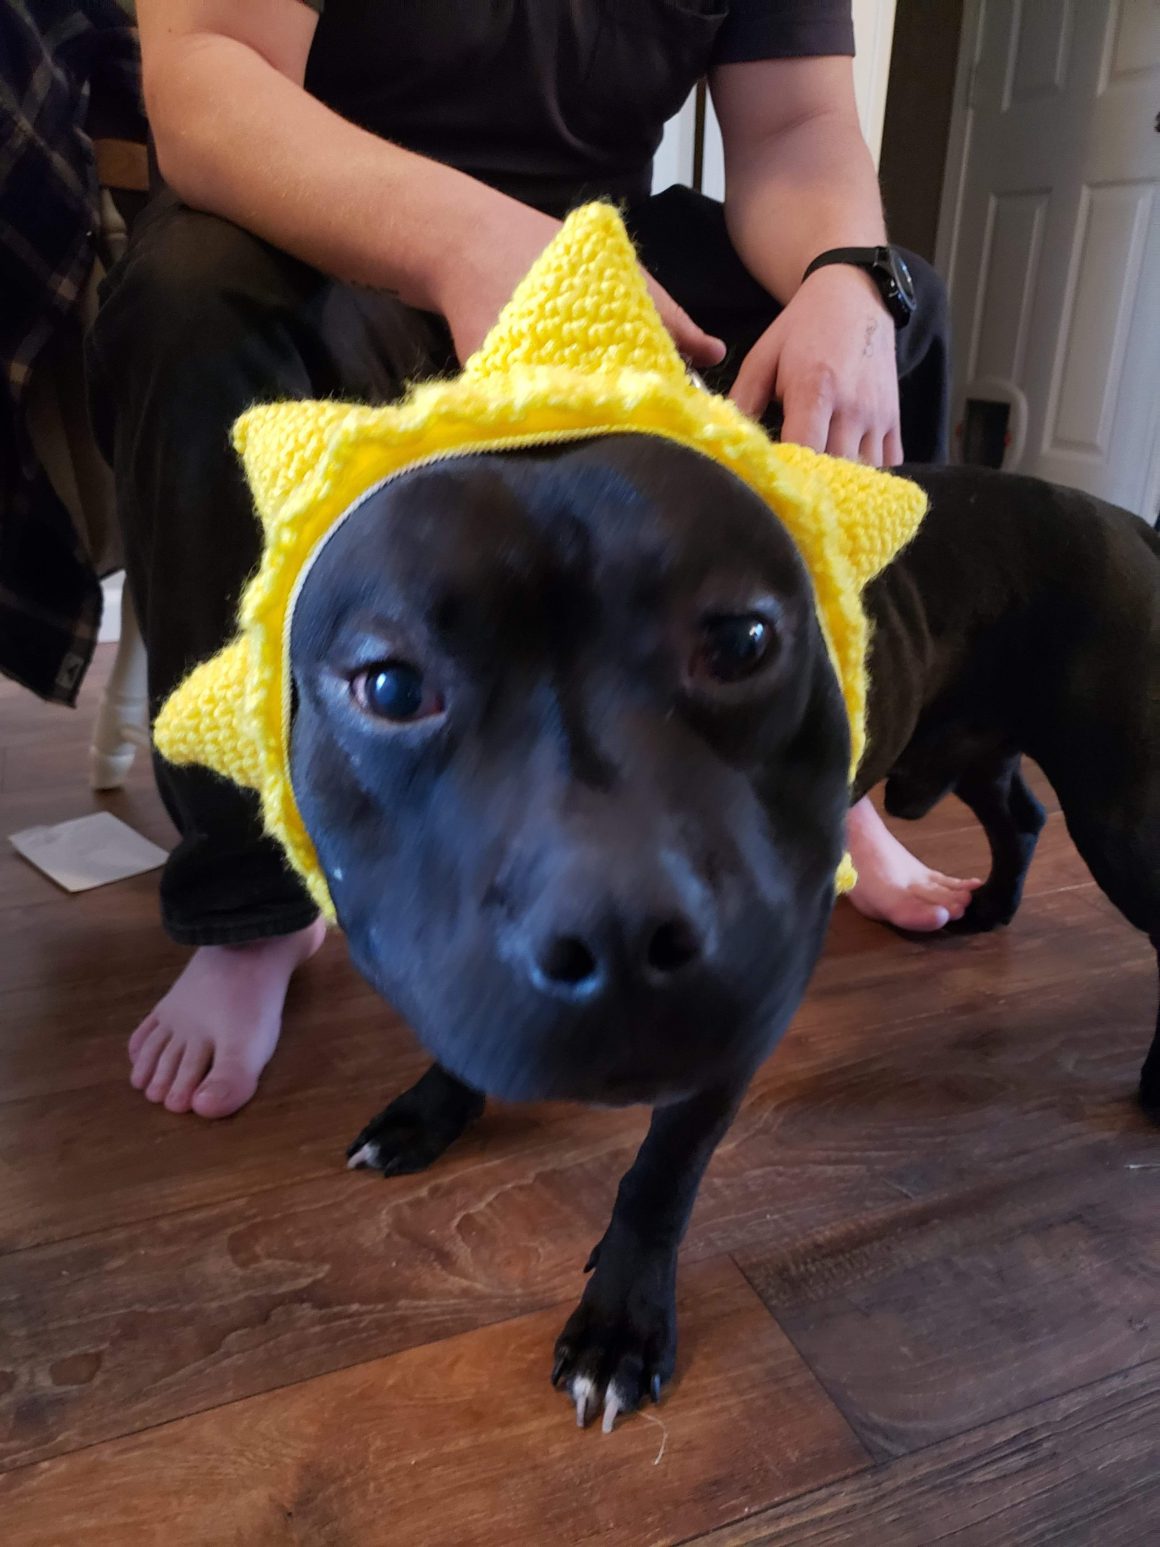 scooter the dog with a star hat